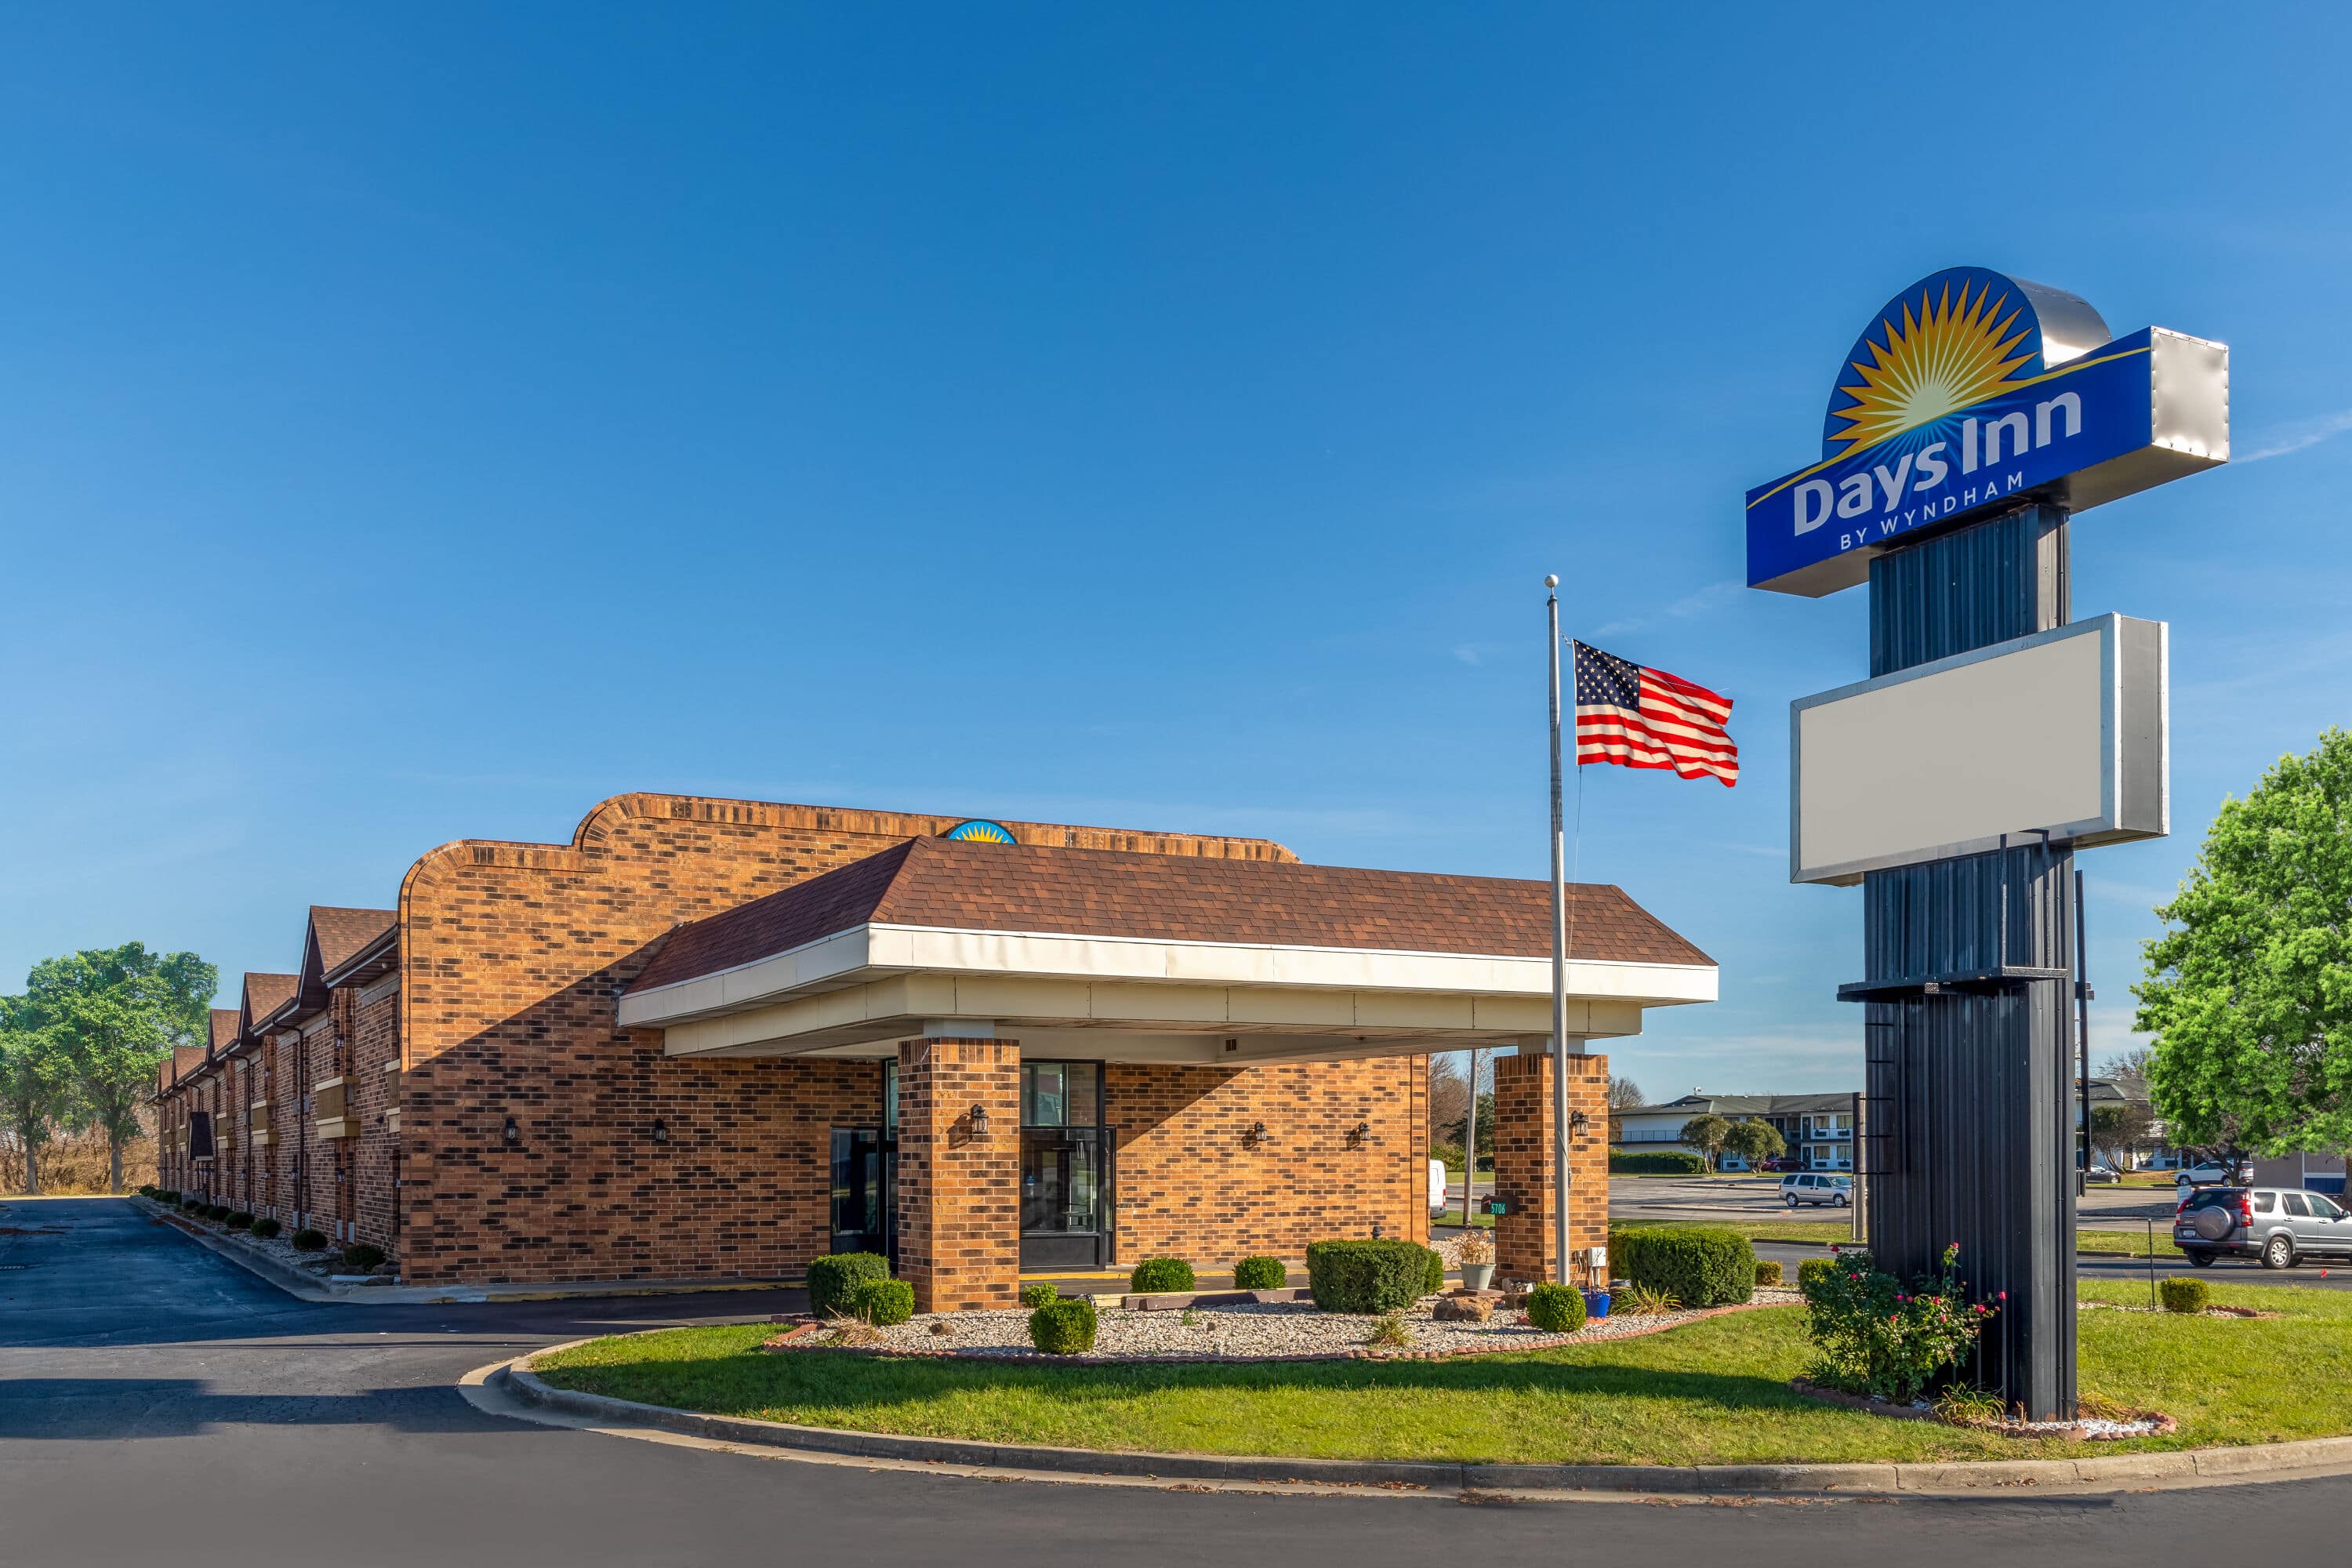 Days Inn by Wyndham Anderson IN Anderson, IN Hotels